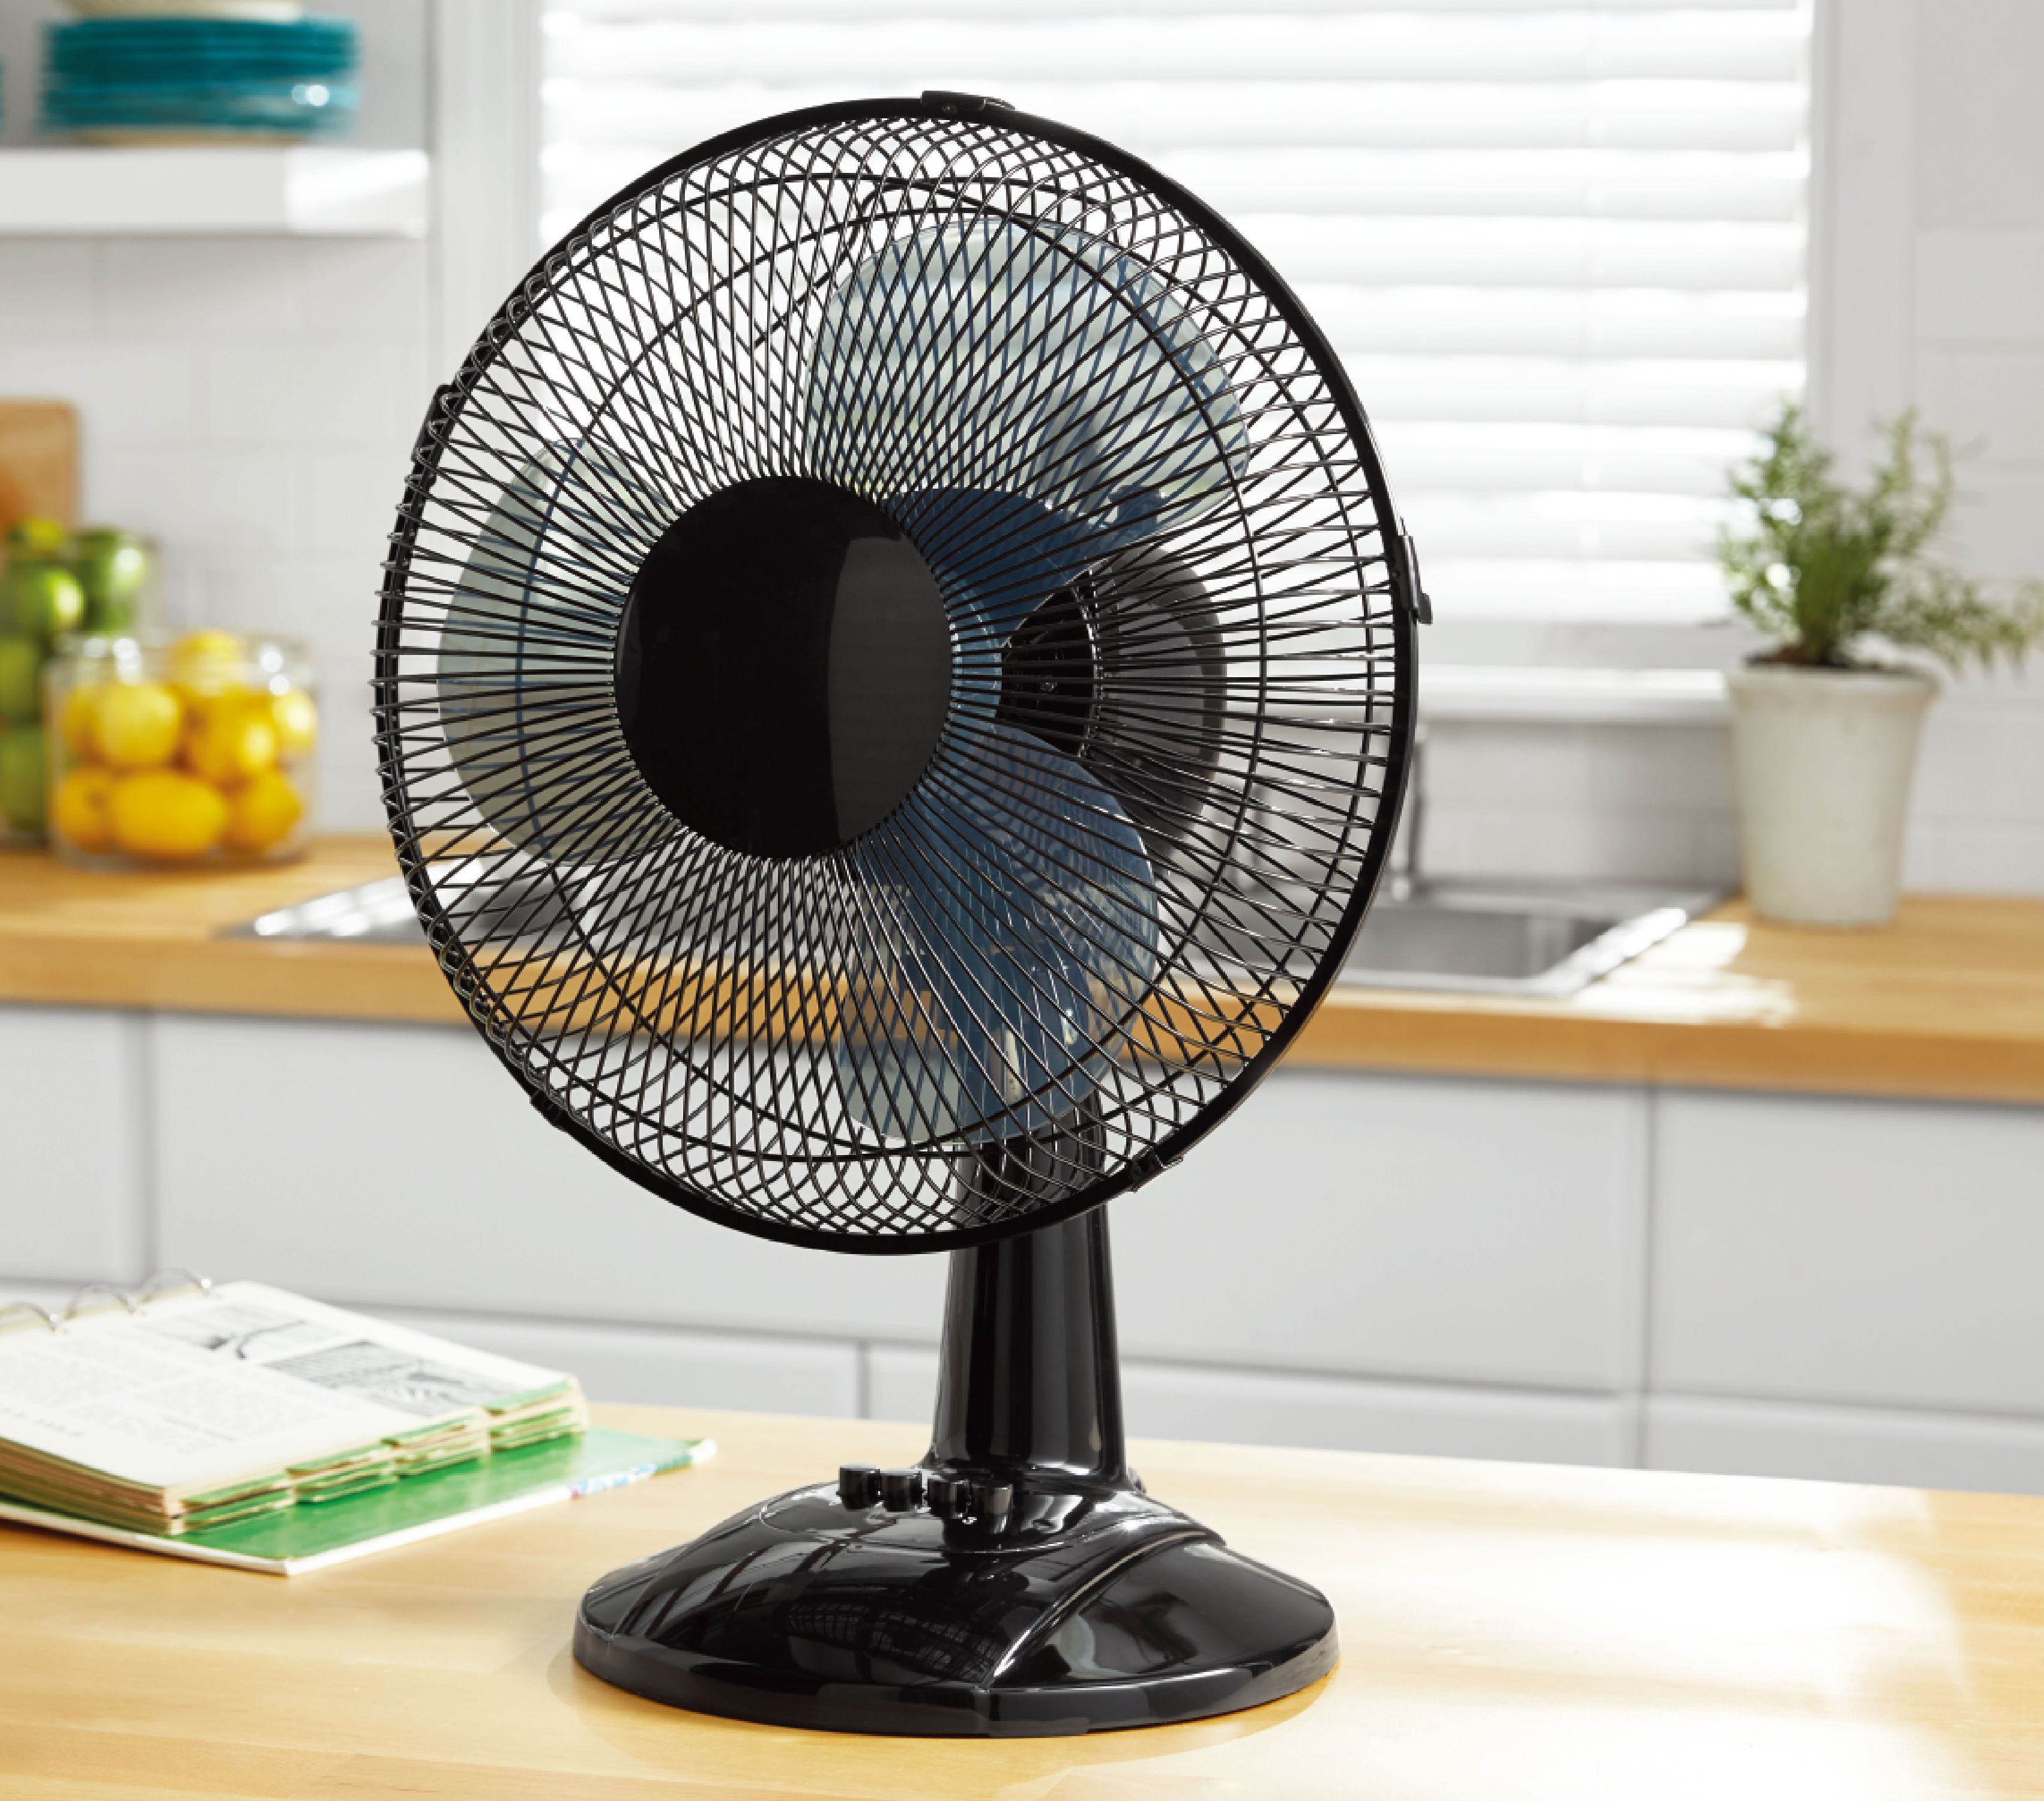 Mainstays 12" 3-Speed Oscillating Table Fan, FT30-8MBB, New, Black - image 3 of 9